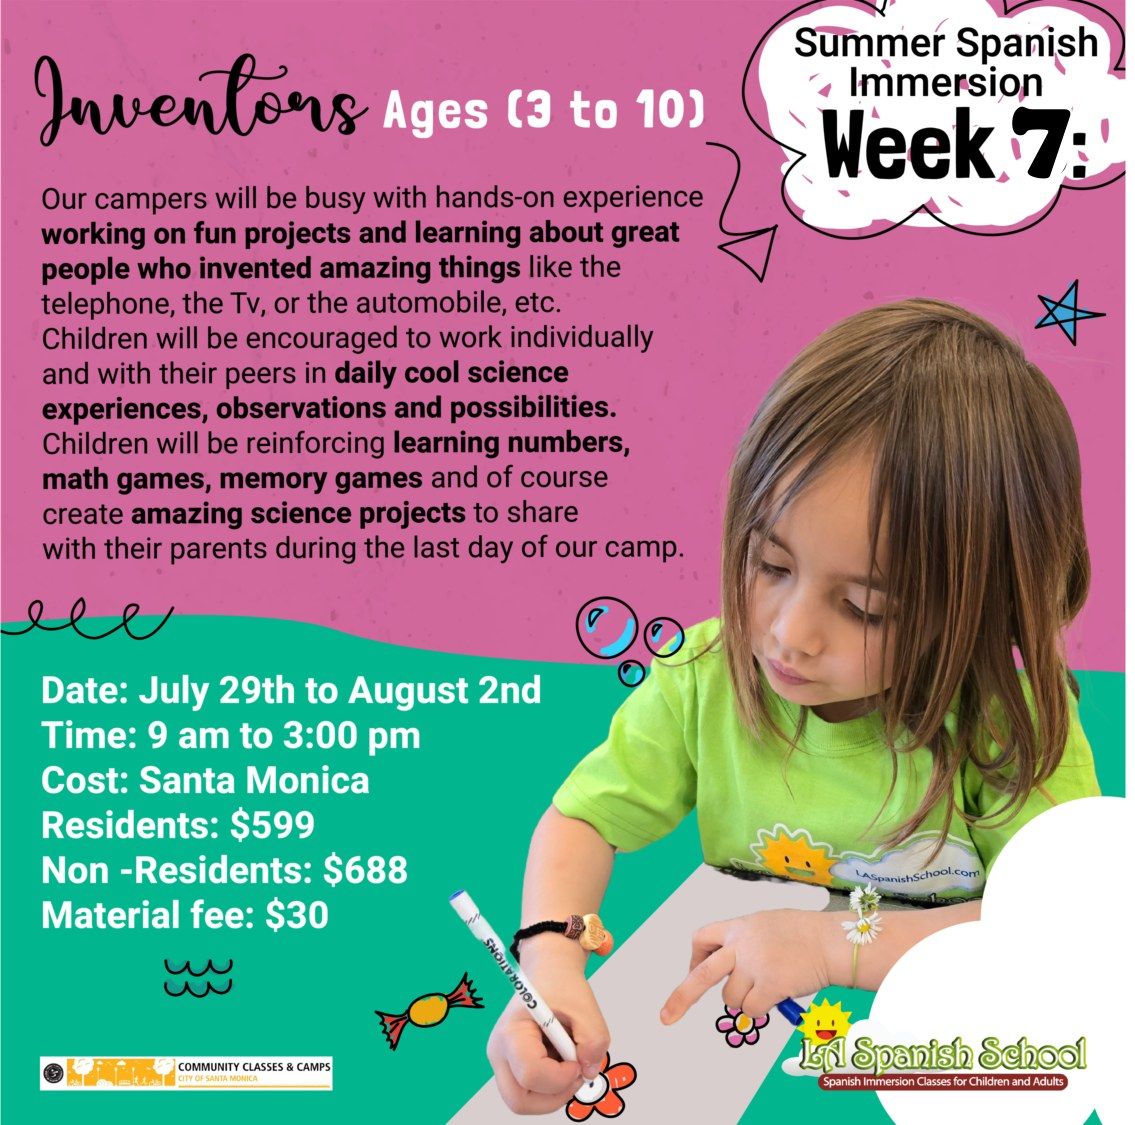 Summer Spanish Immersion Camps (Week 7)